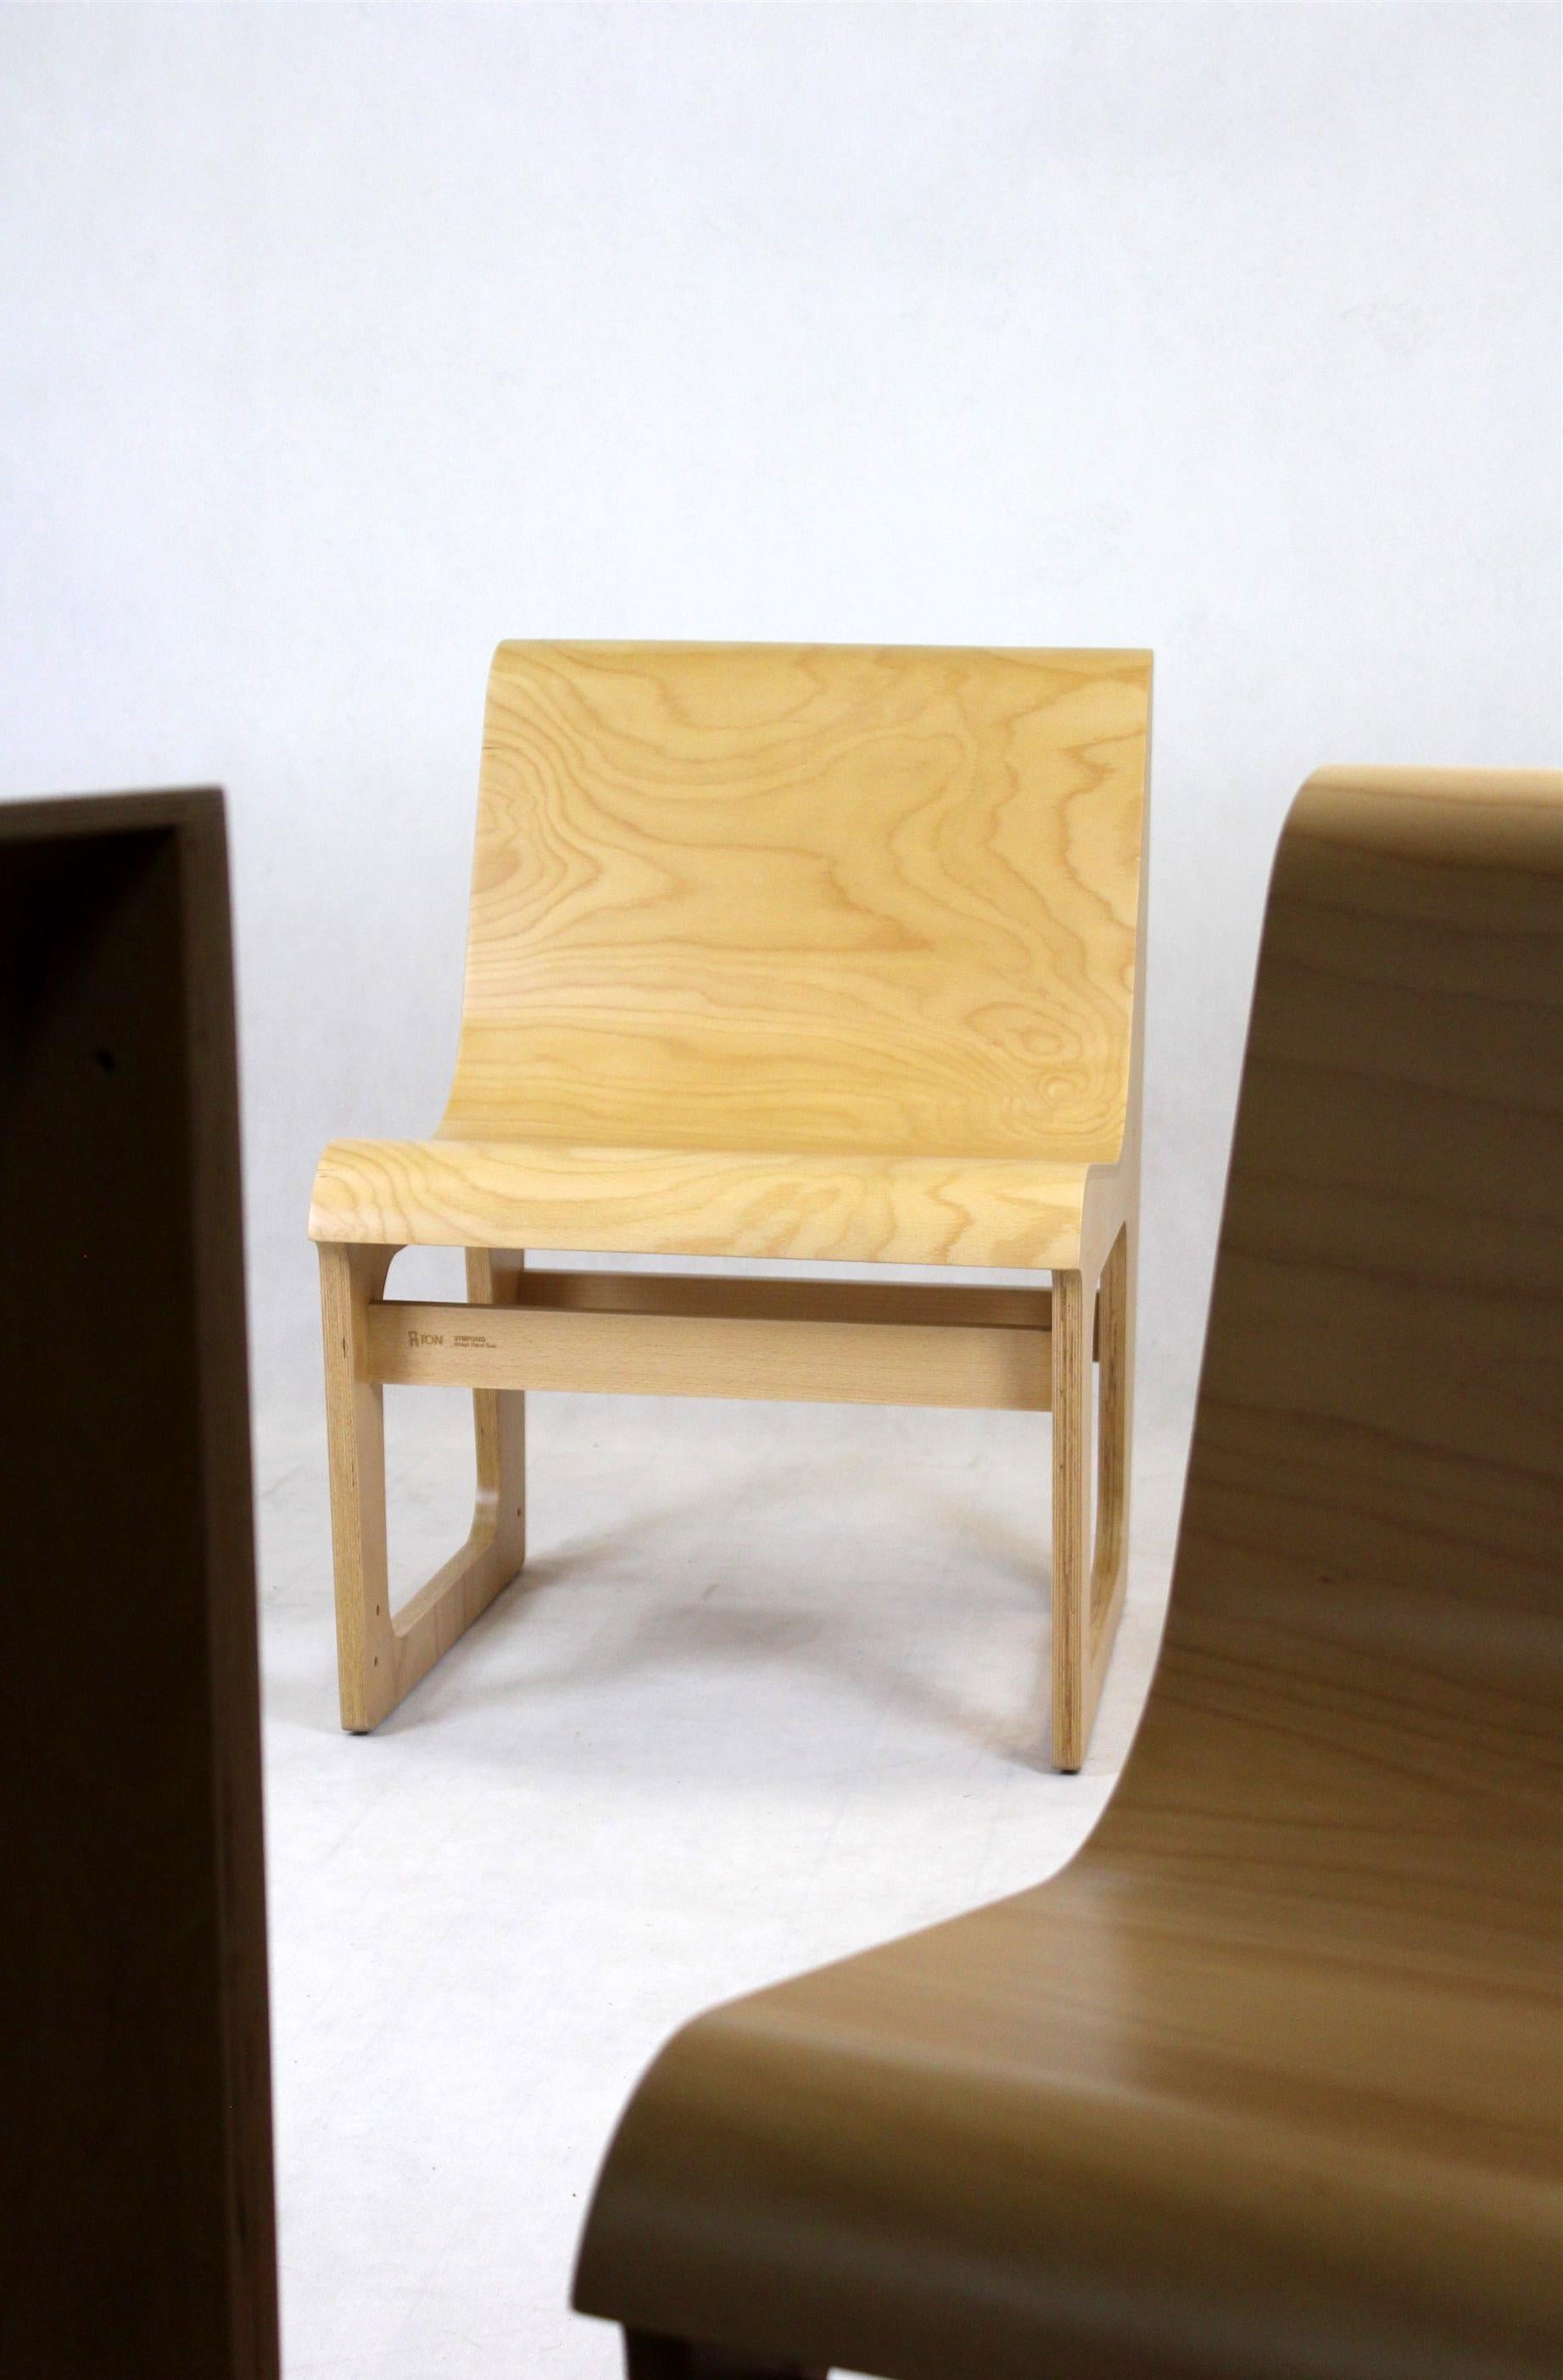 Beech Plywood Symposio Bench / Chairs by René Šulc for Ton, 2010s 1